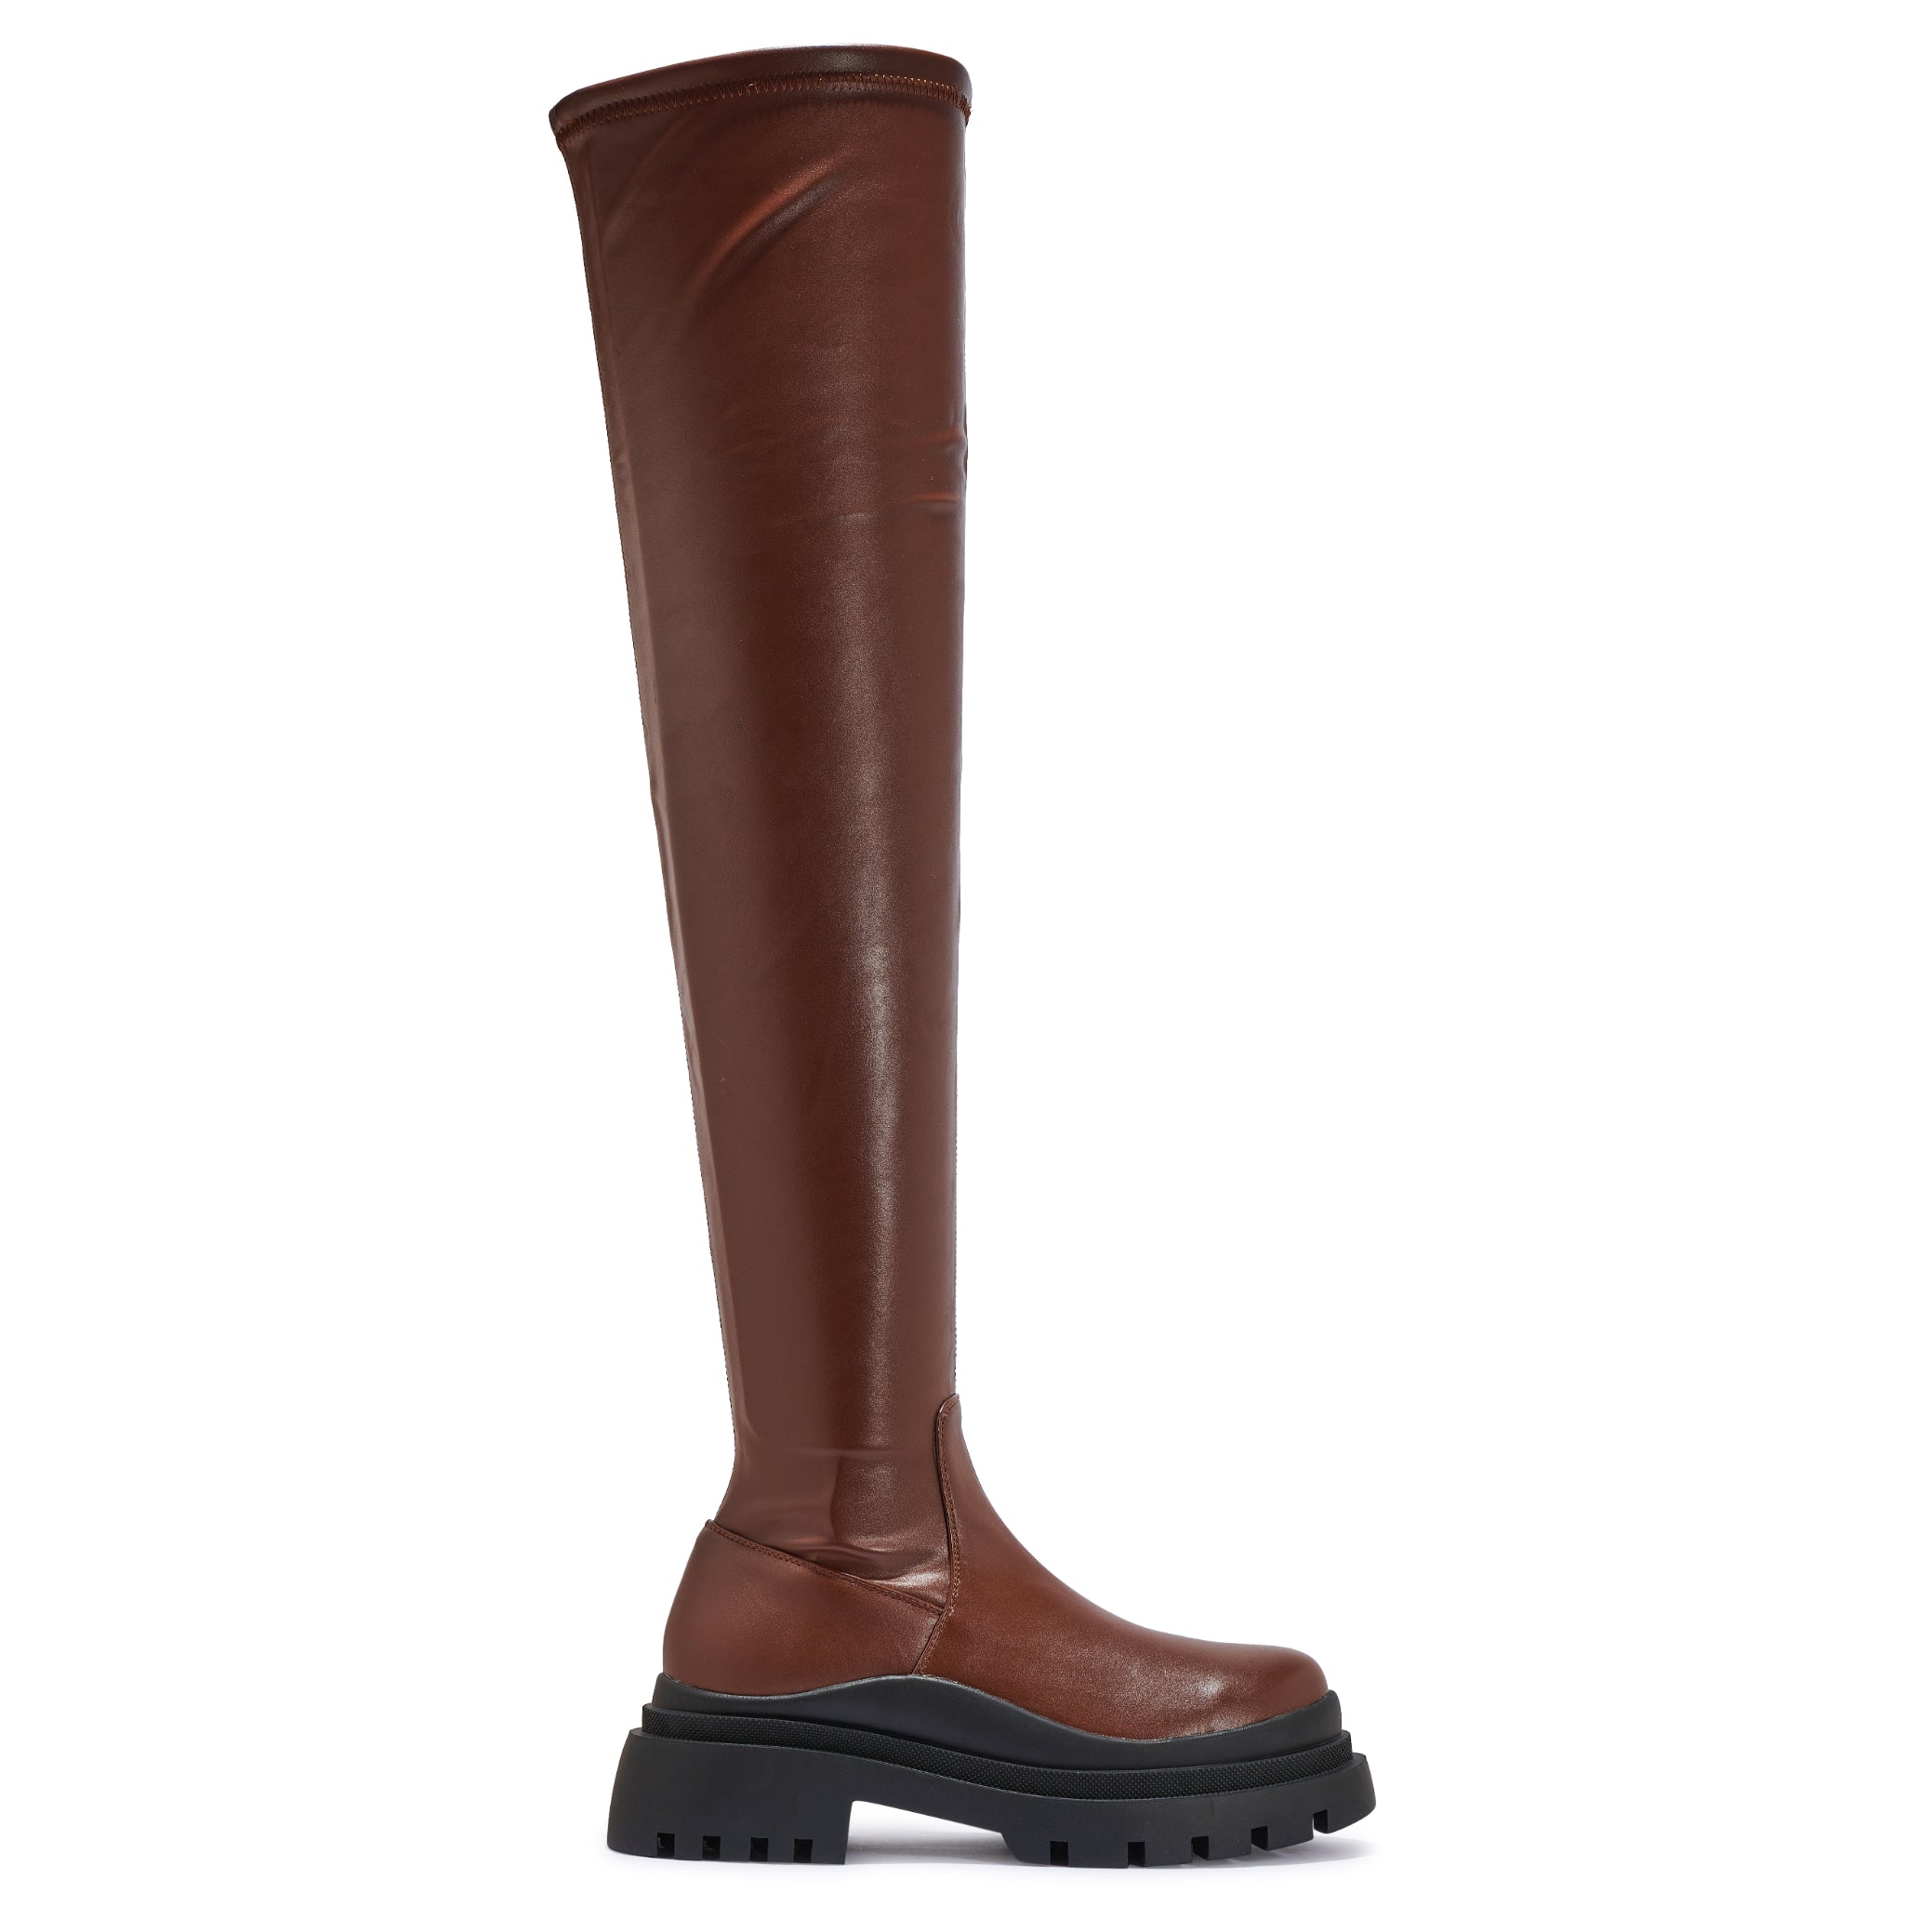 CHILLI4 - CHUNKY DOUBLE CLEATED SOLE KNEE HIGH BOOT